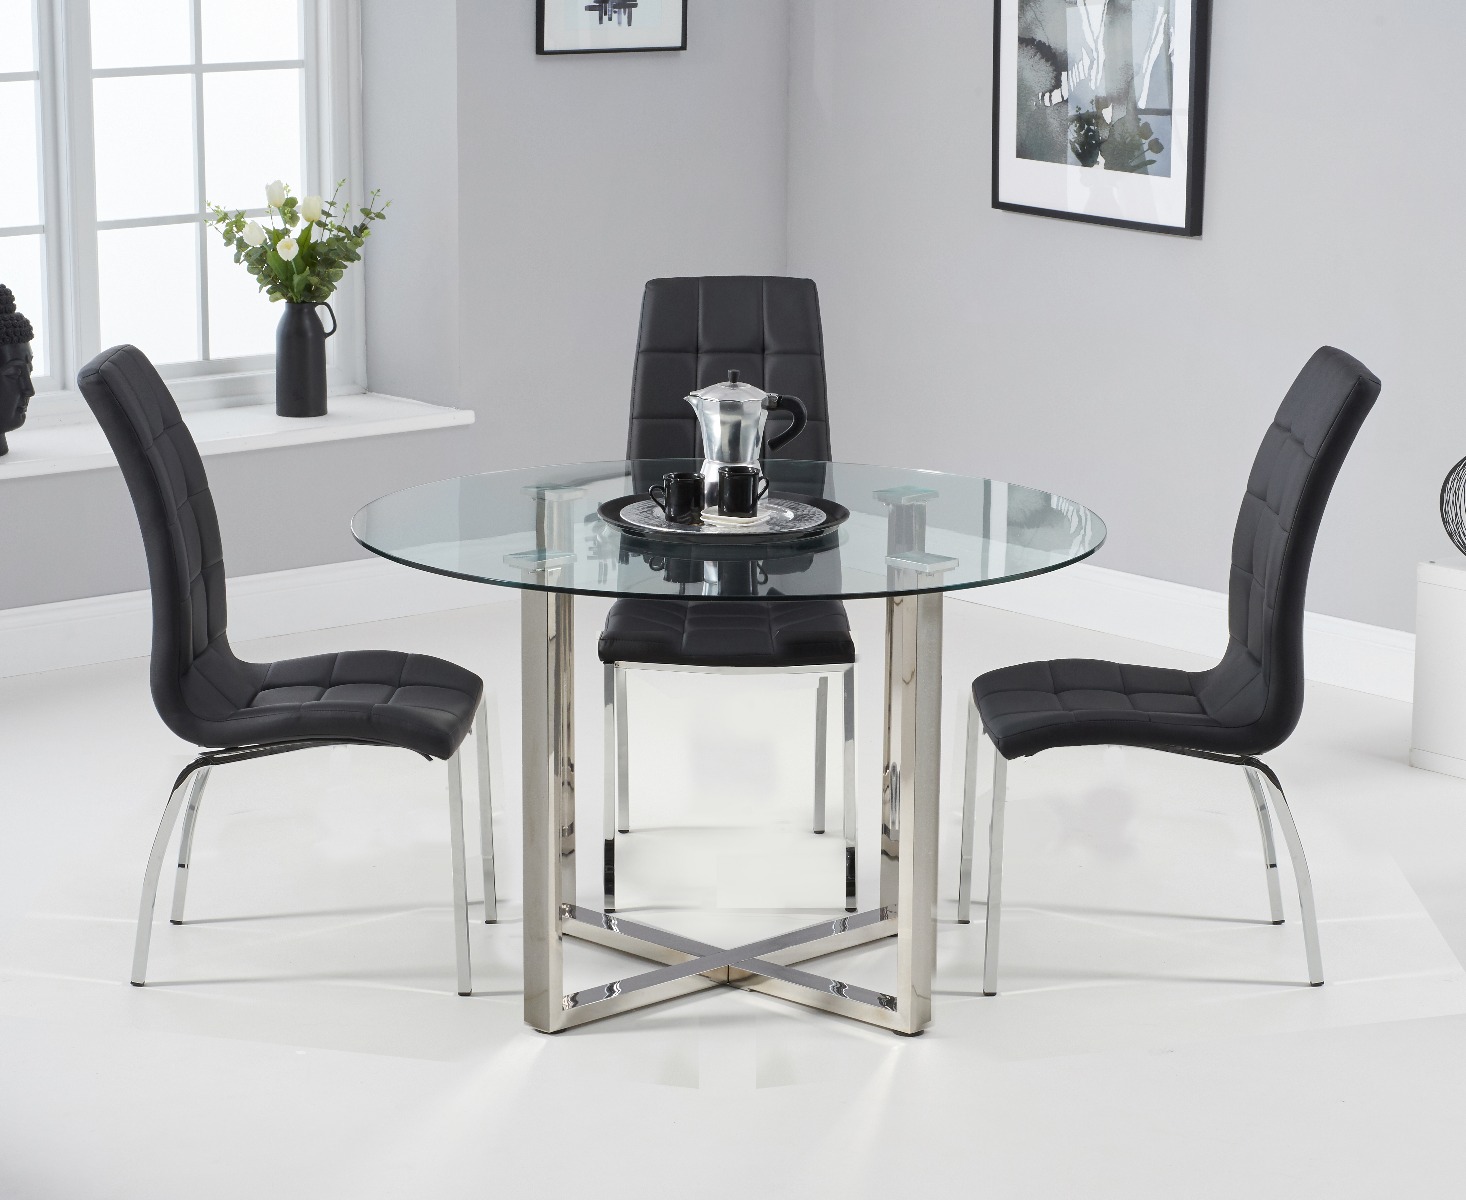 Photo 2 of Vaso 120cm round glass dining table with 4 white enzo chairs